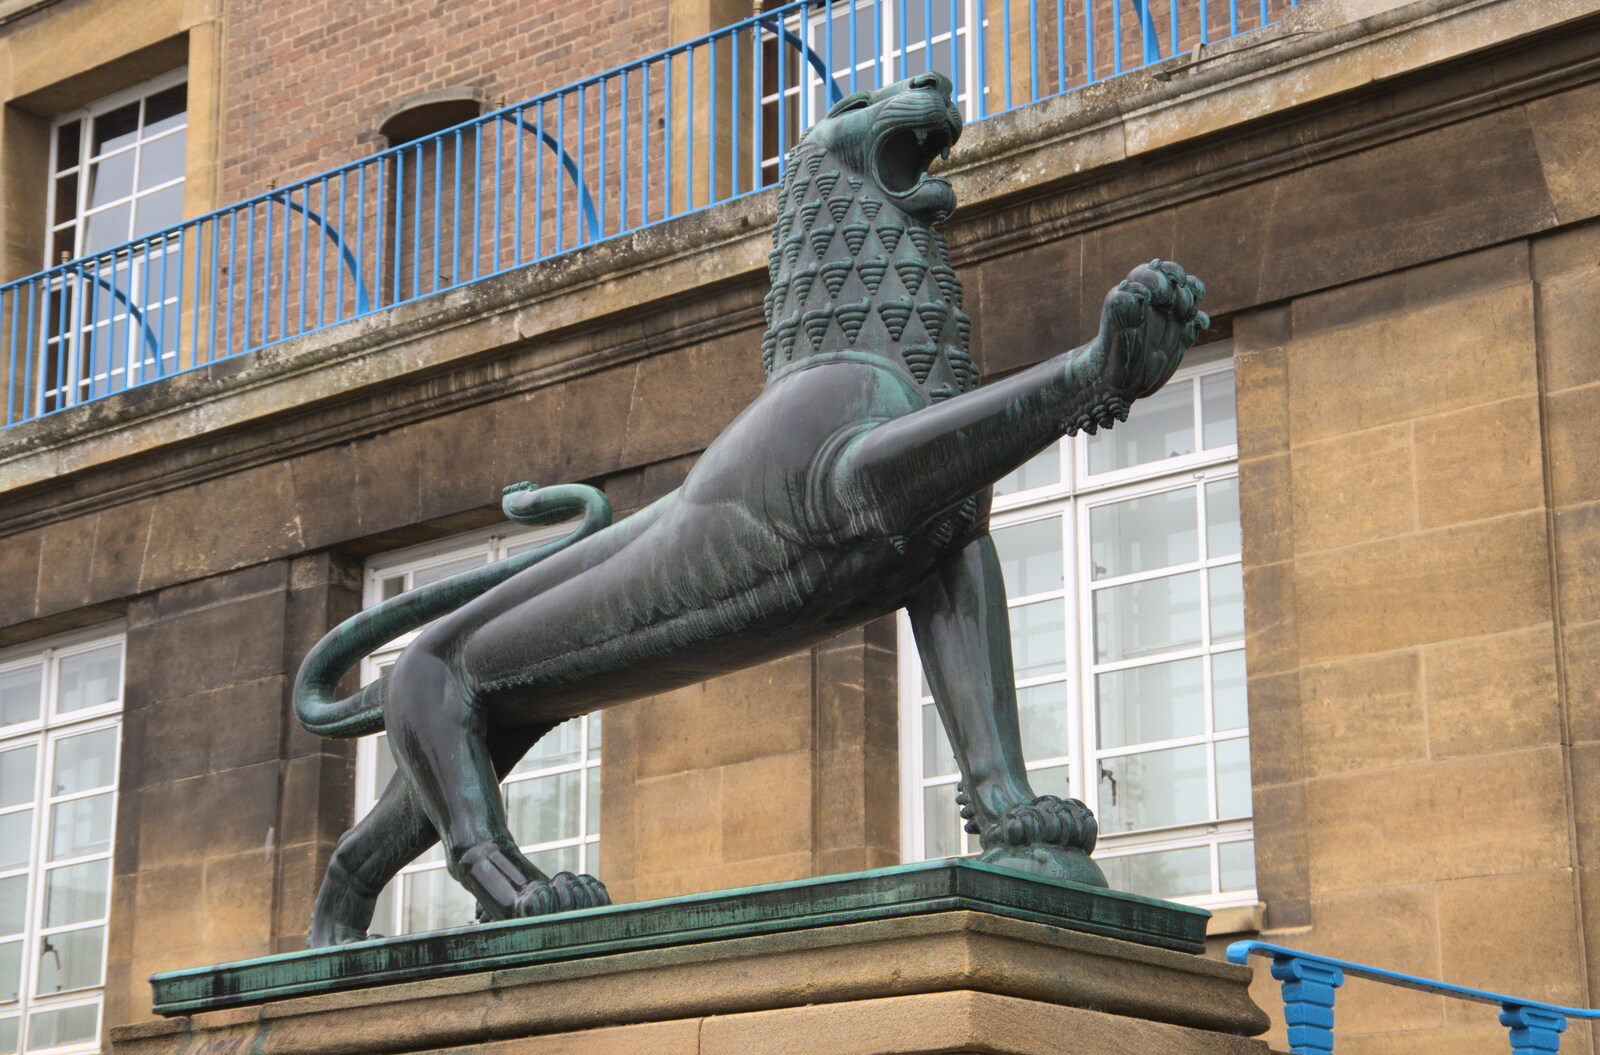 One of the lions outside the City Hall from A Trip to Norwich, Norfolk - 27th September 2020